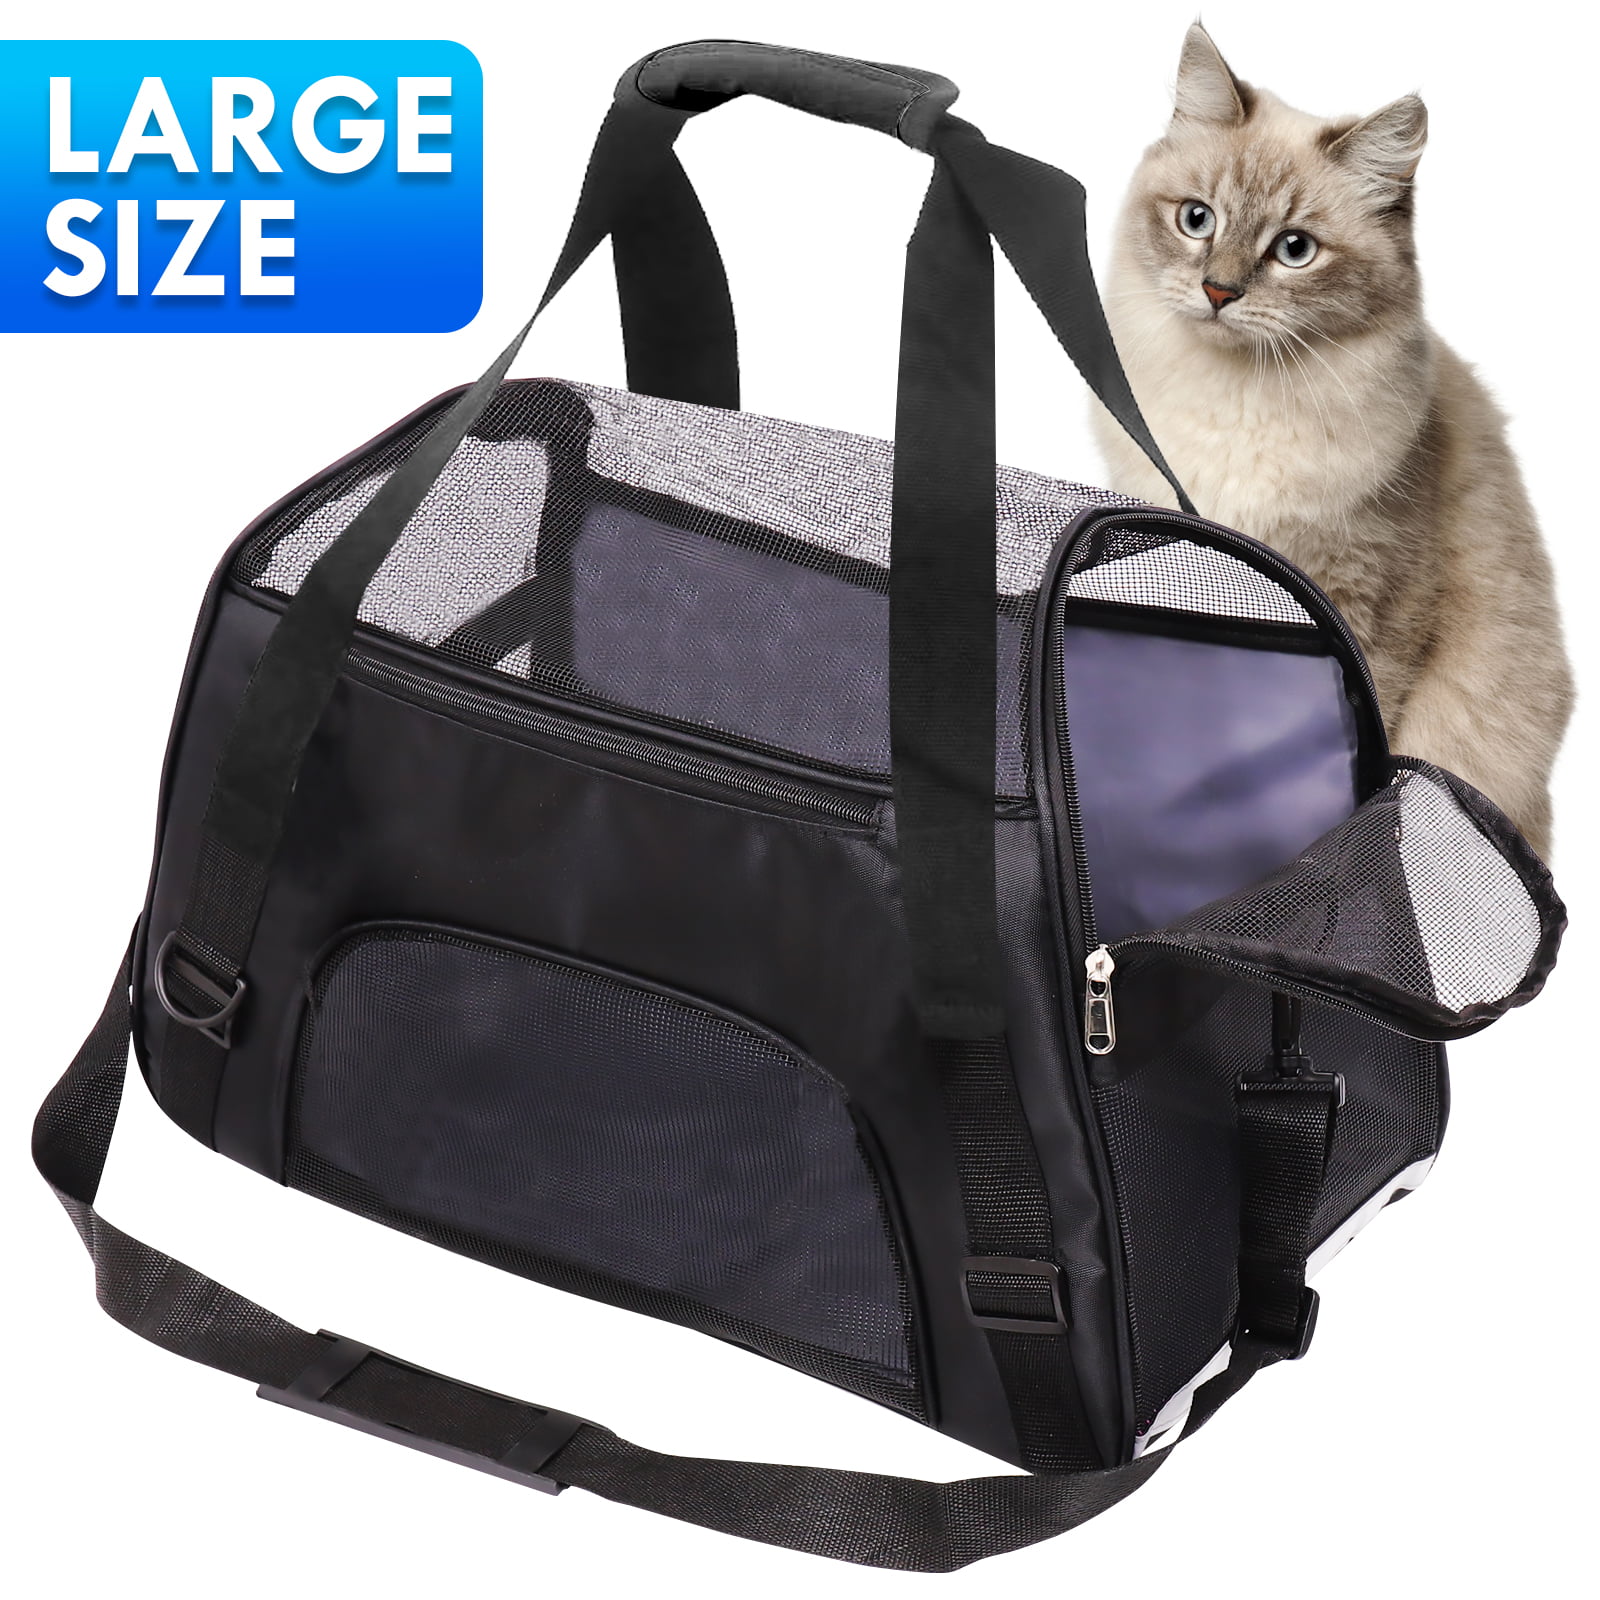 Airline Approved Bengal Cat Carrier Bag